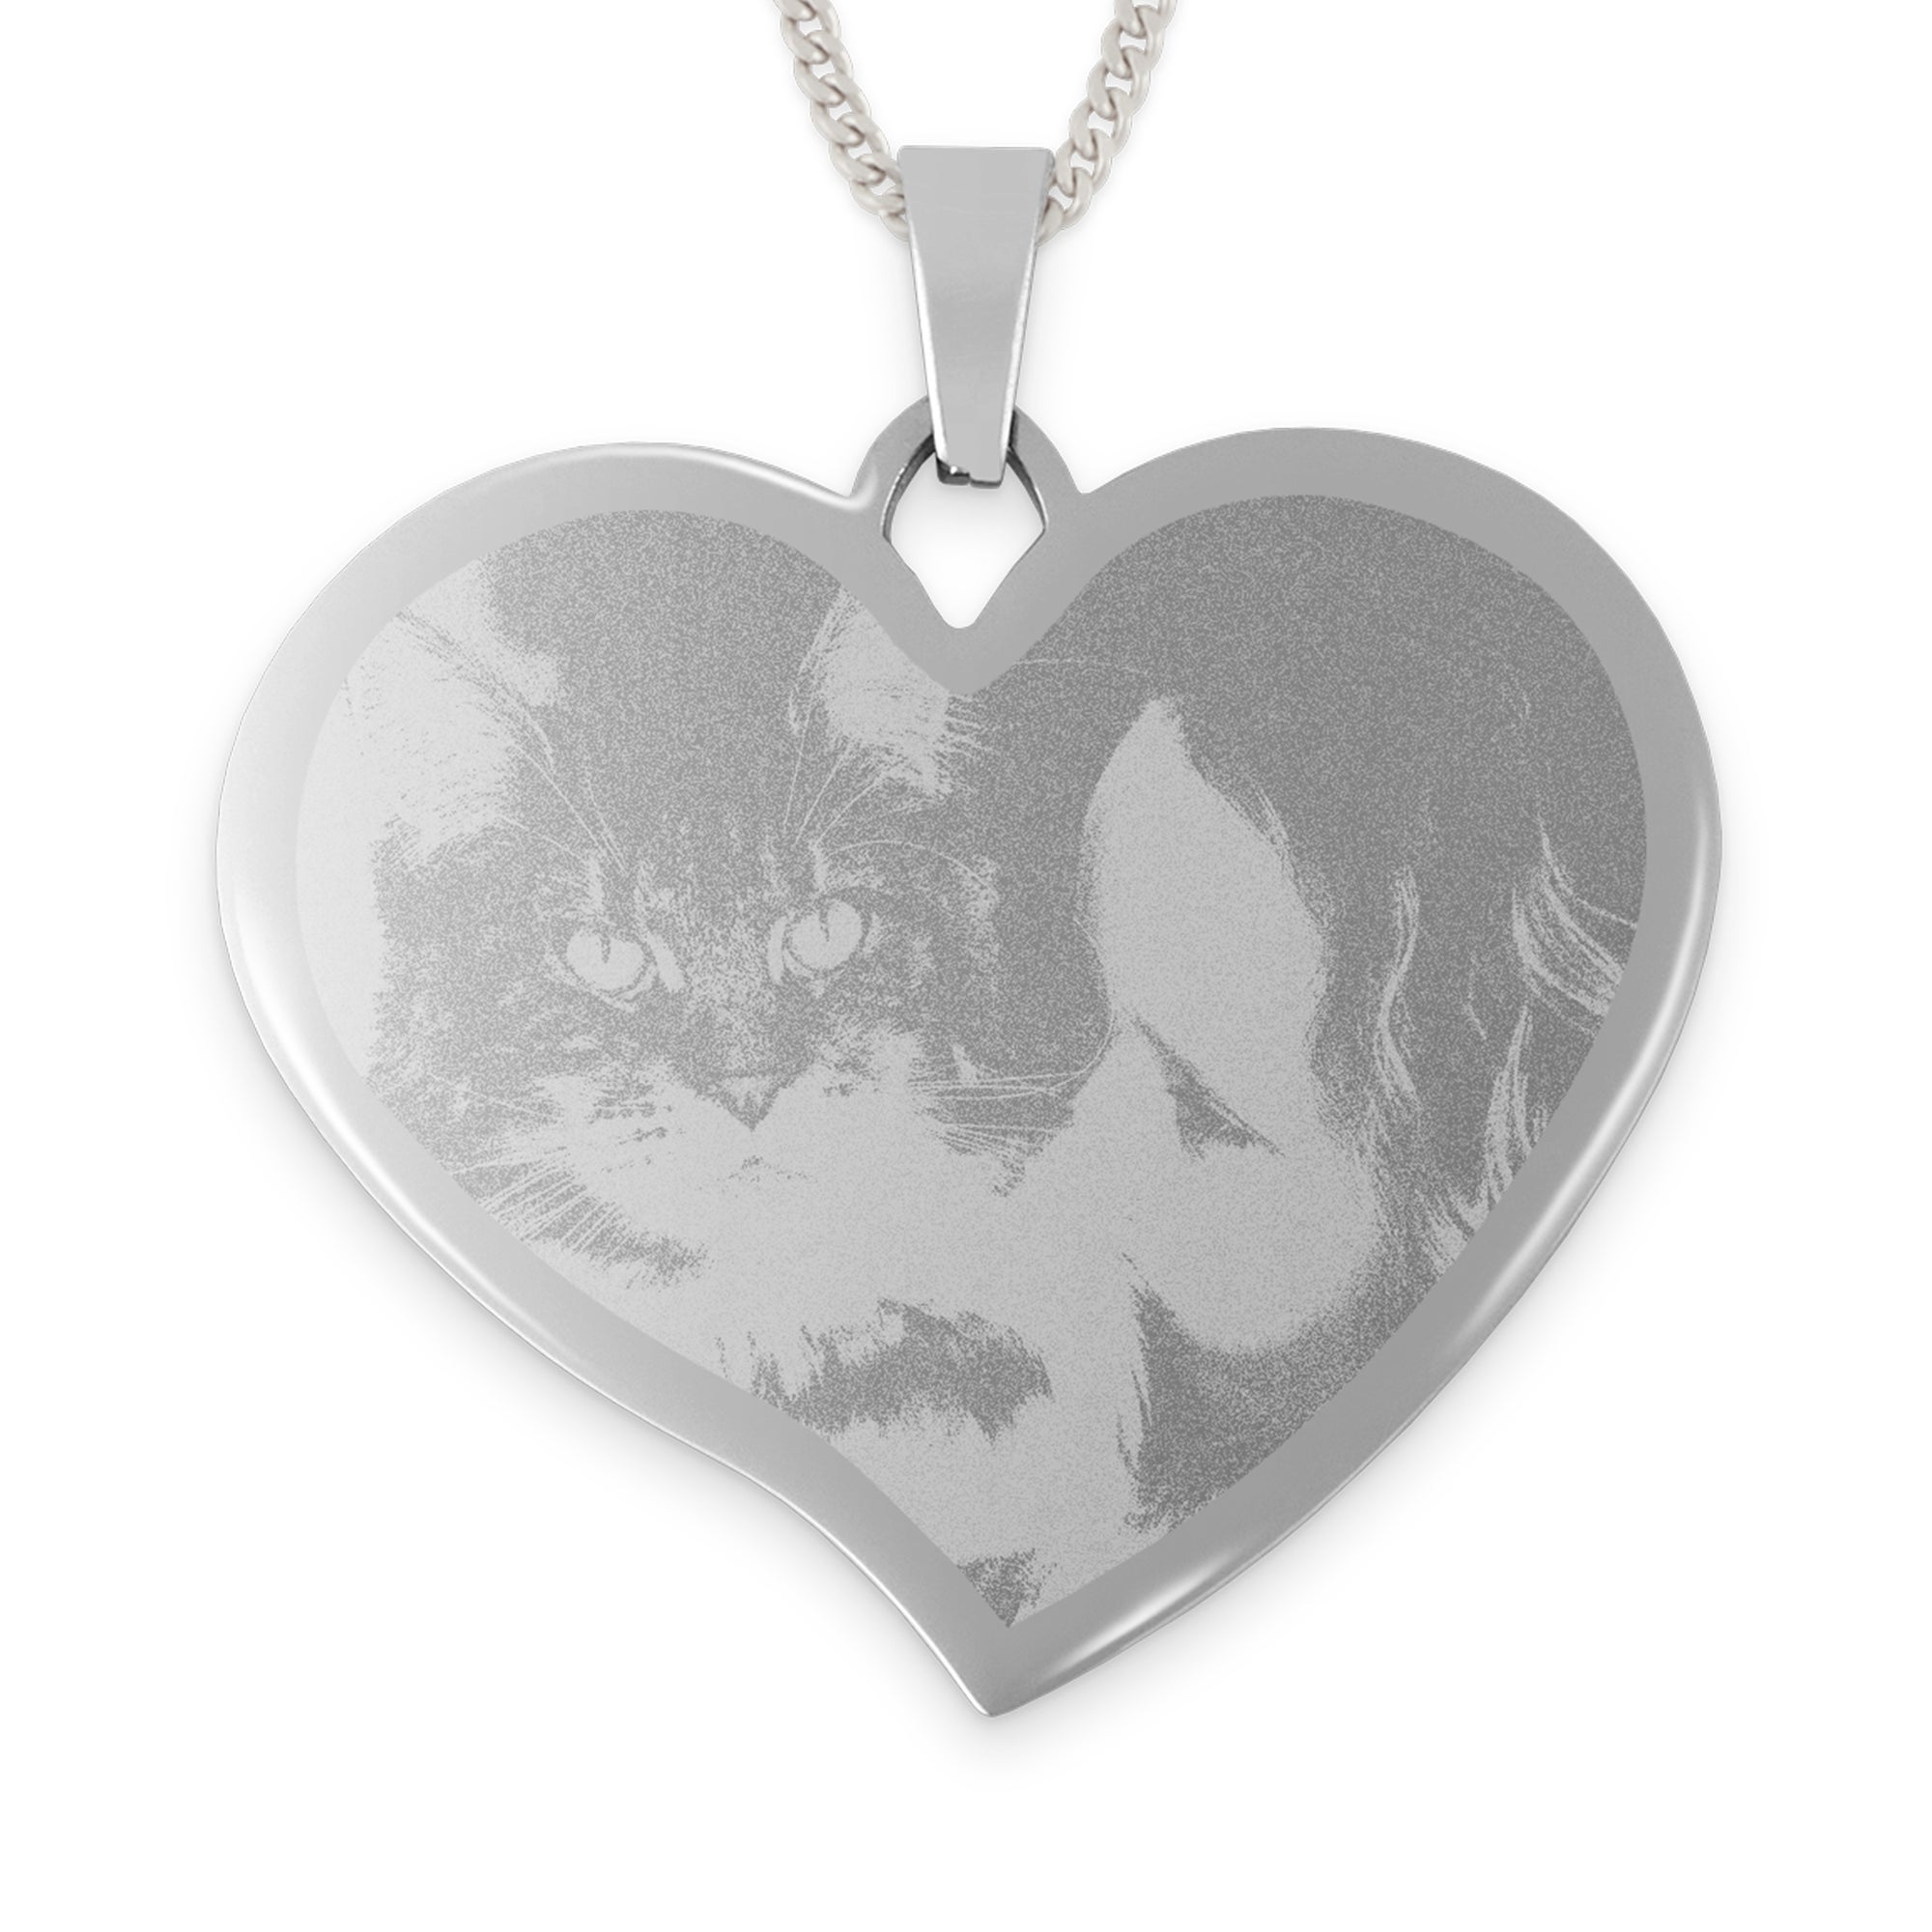 Heart necklace with photo - large - silver